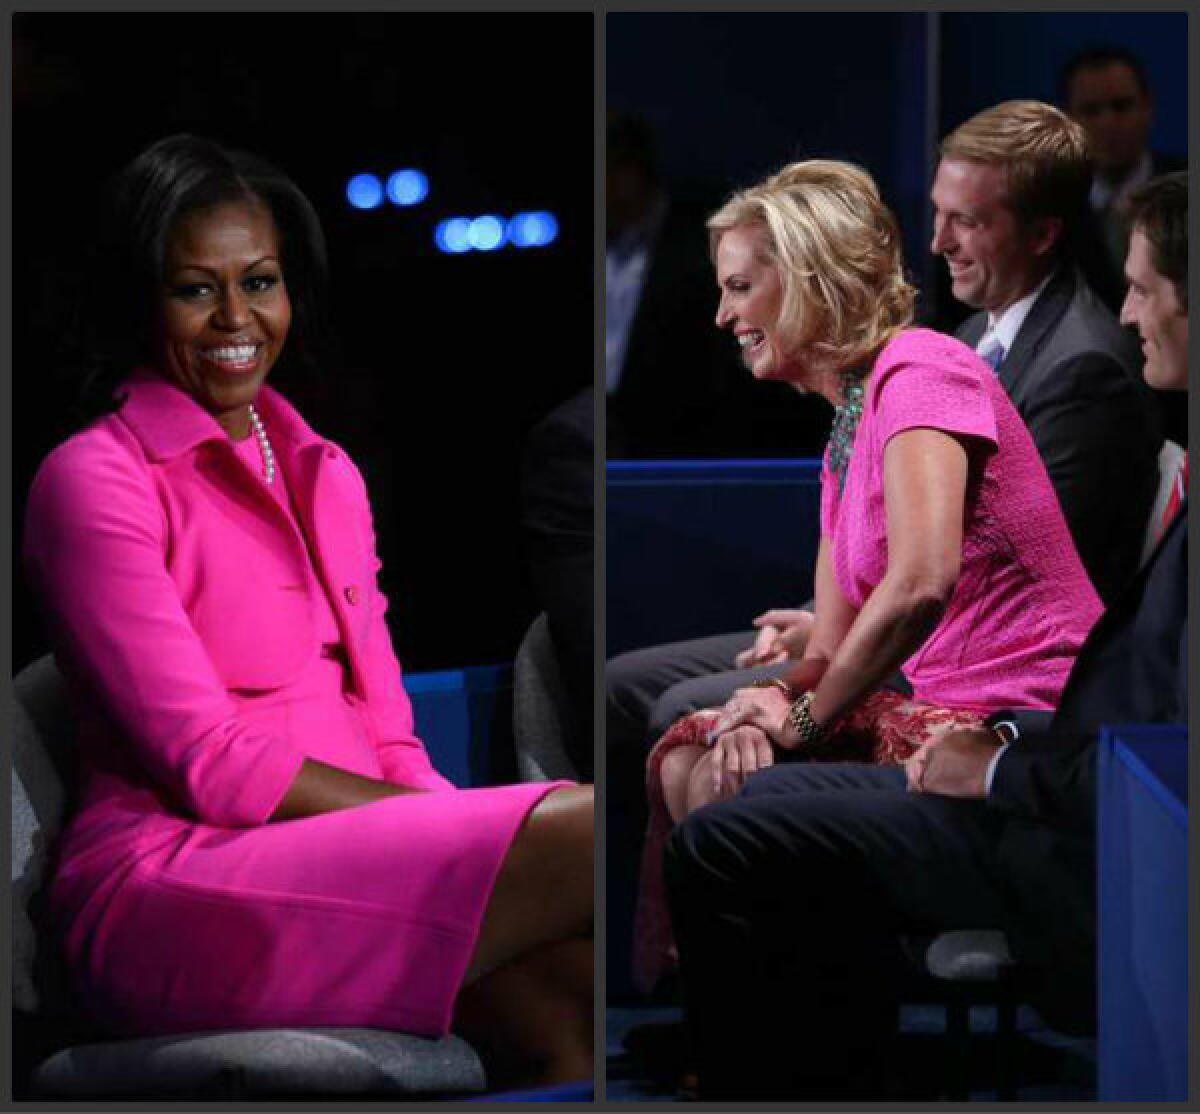 Michelle Obama, left, and Ann Romney both wore bright pink at the second presidential debate.